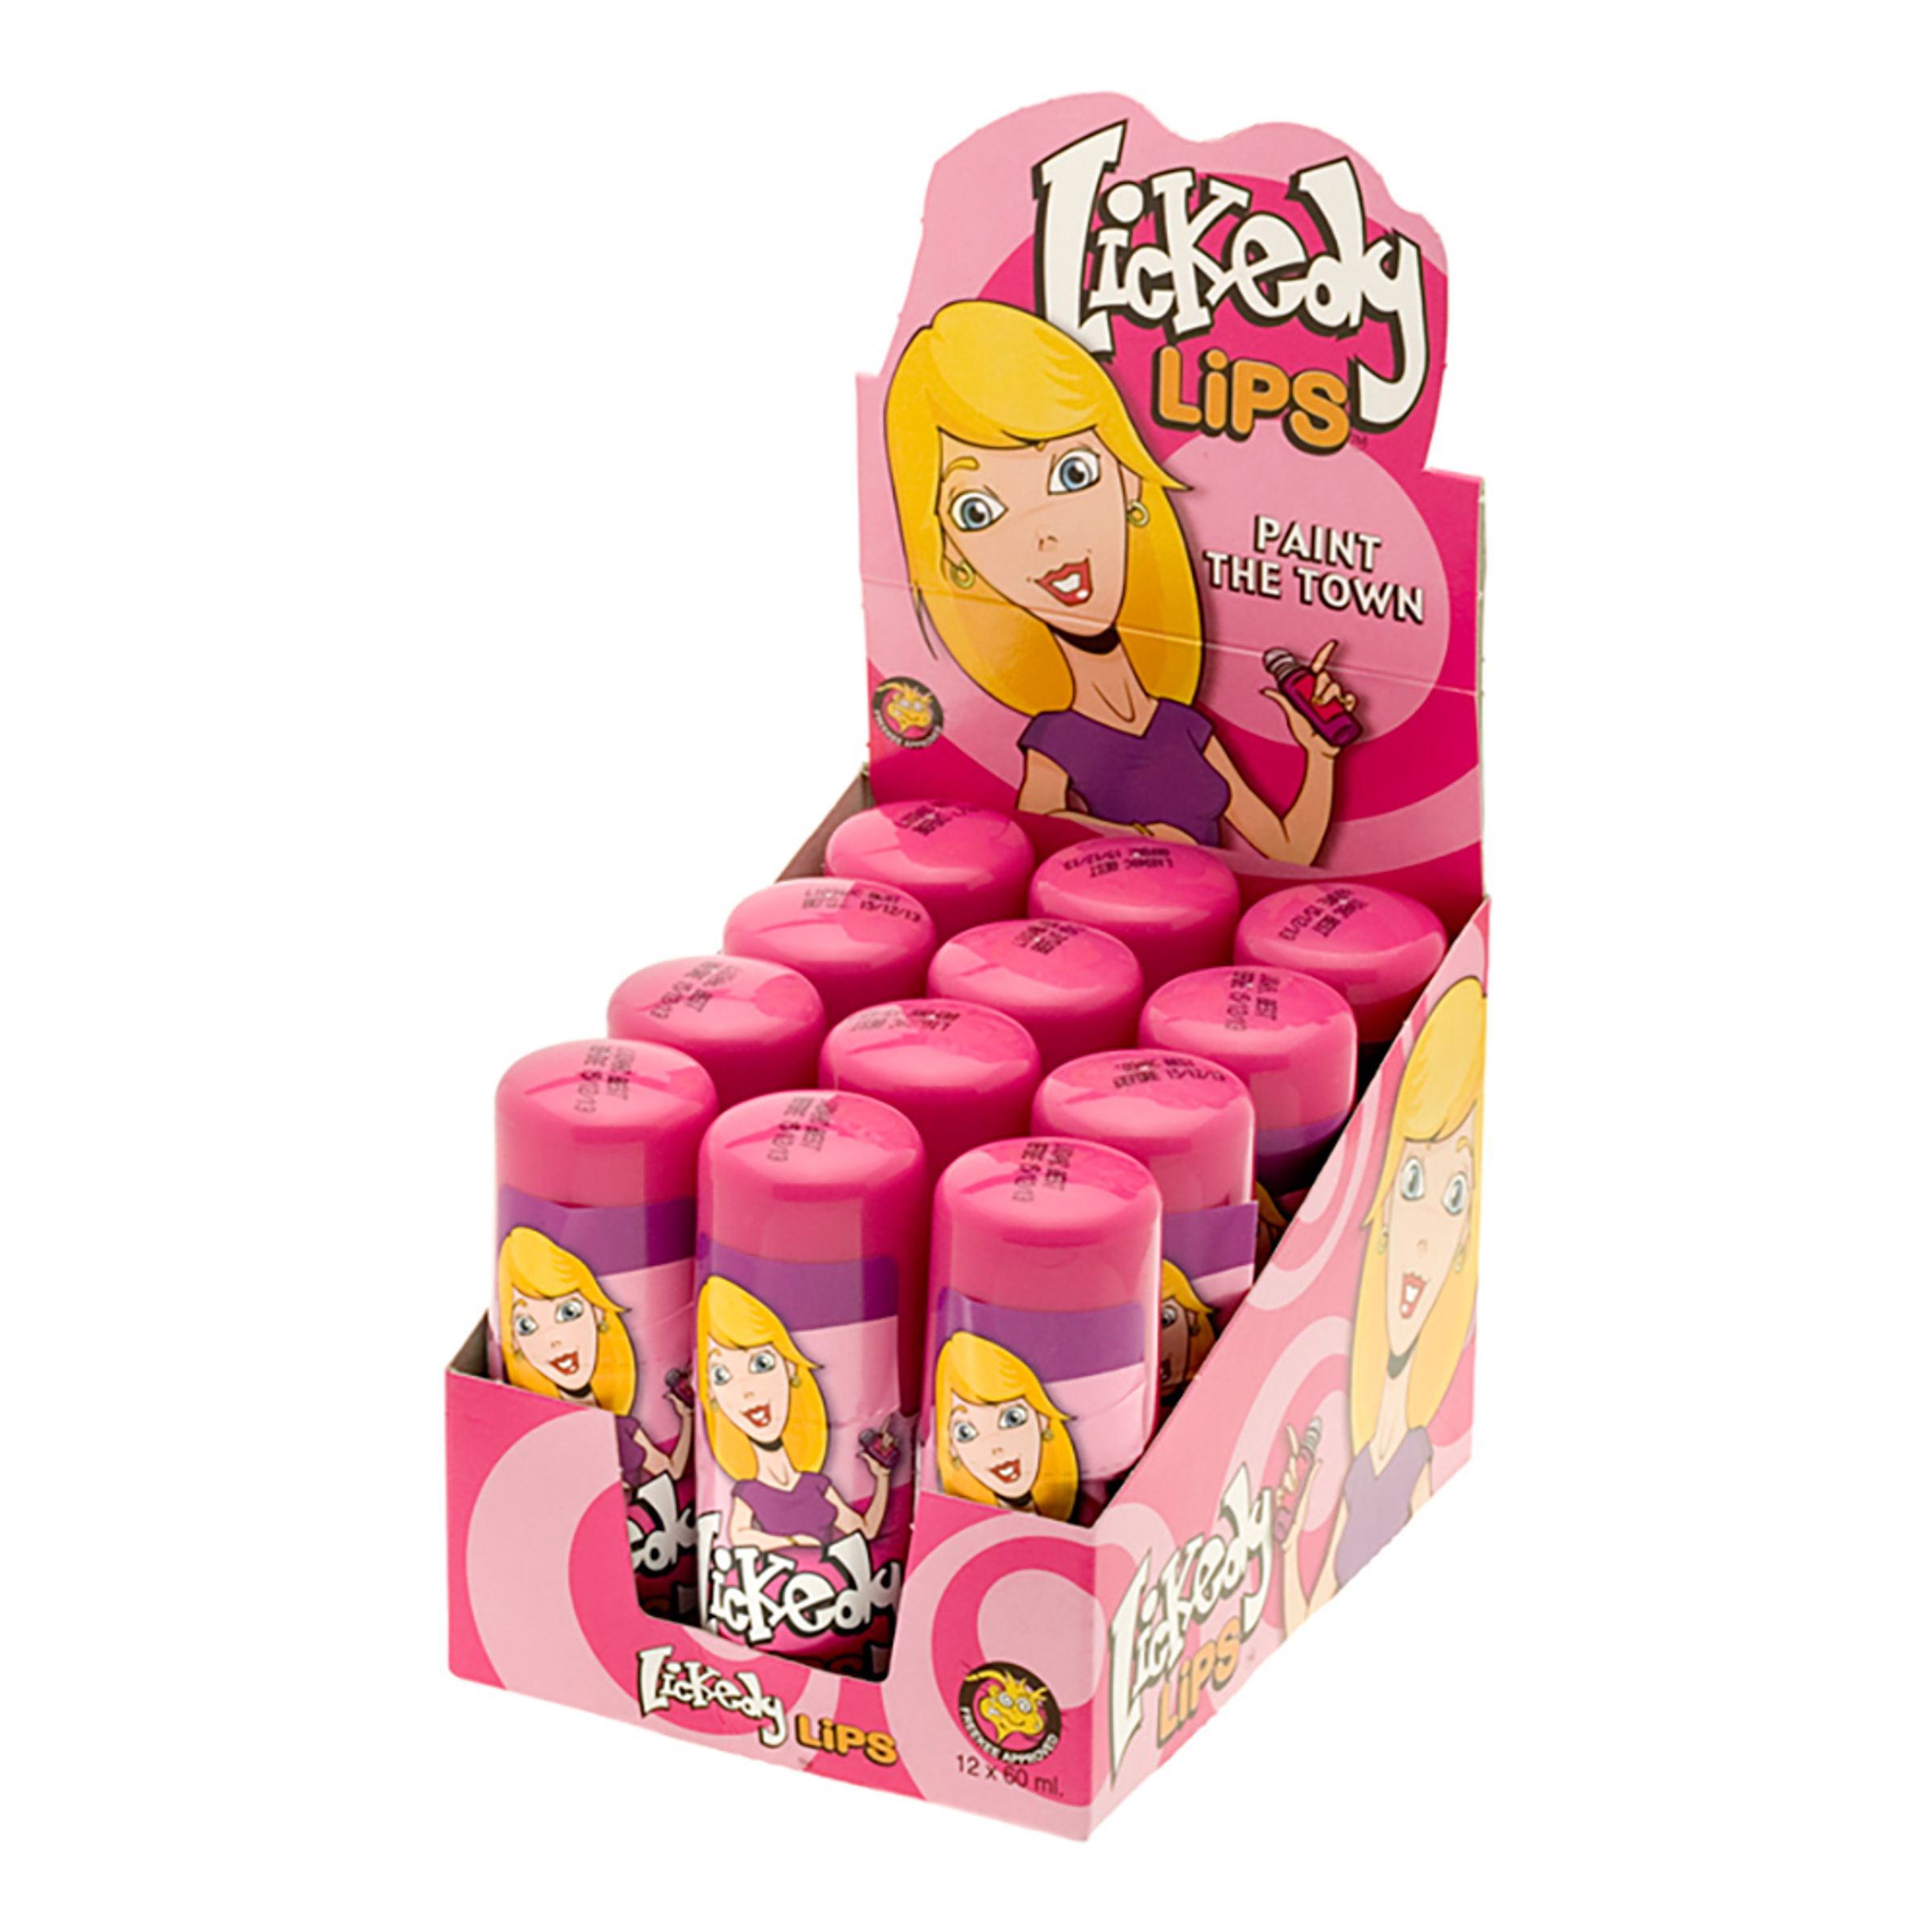 Lickedy Lips - 1-pack